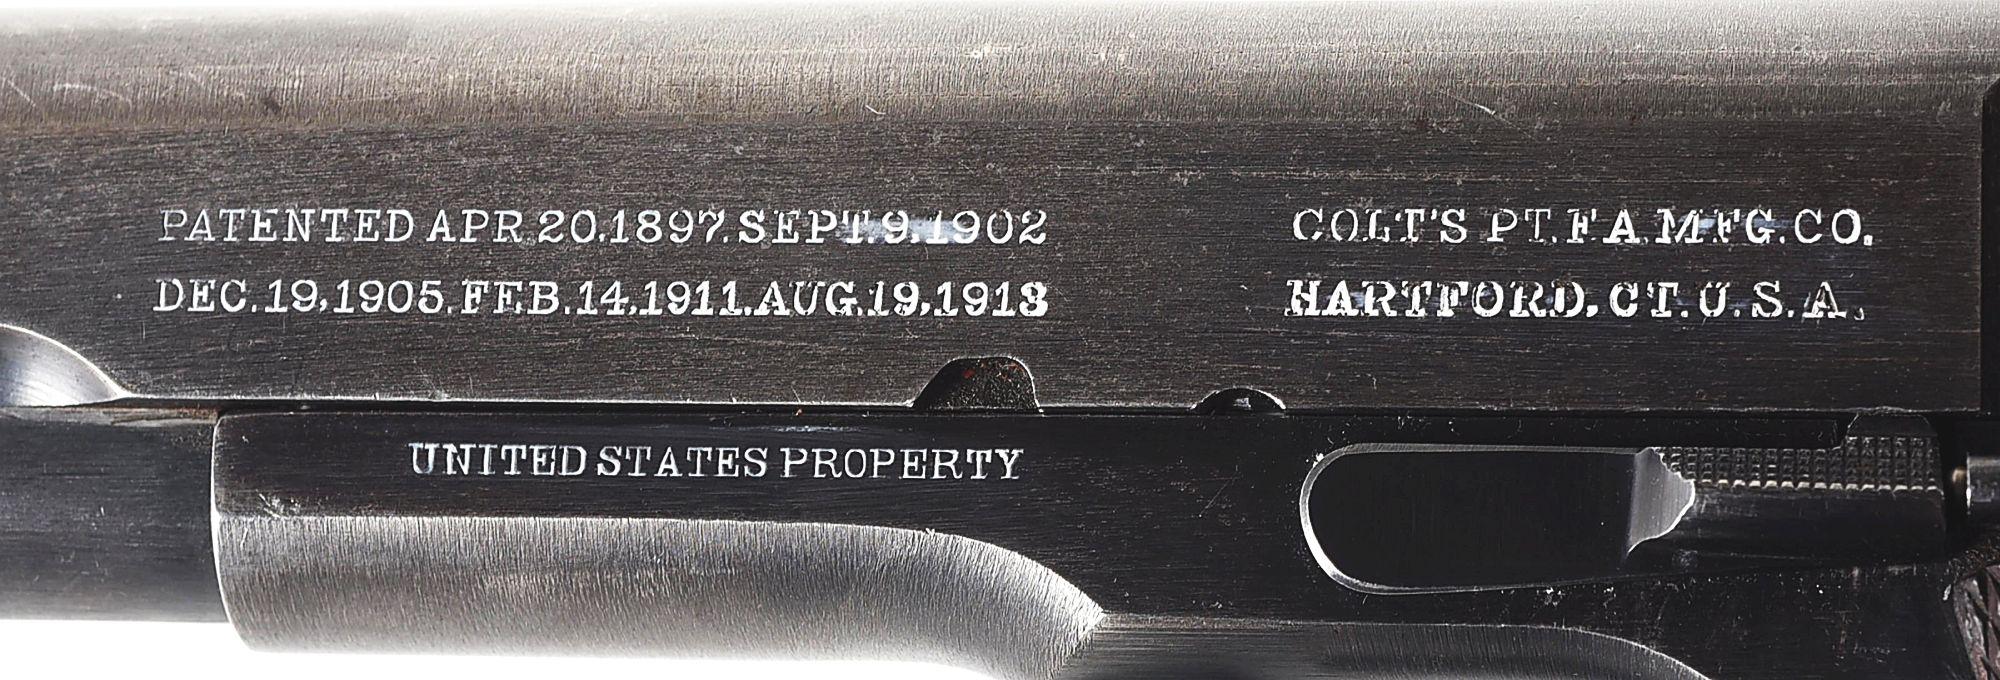 (C) COLT 1911 .45 ACP SEMI-AUTOMATIC PISTOL WITH COLT LETTER INDICATING SHIPMENT TO SPRINGFIELD (191